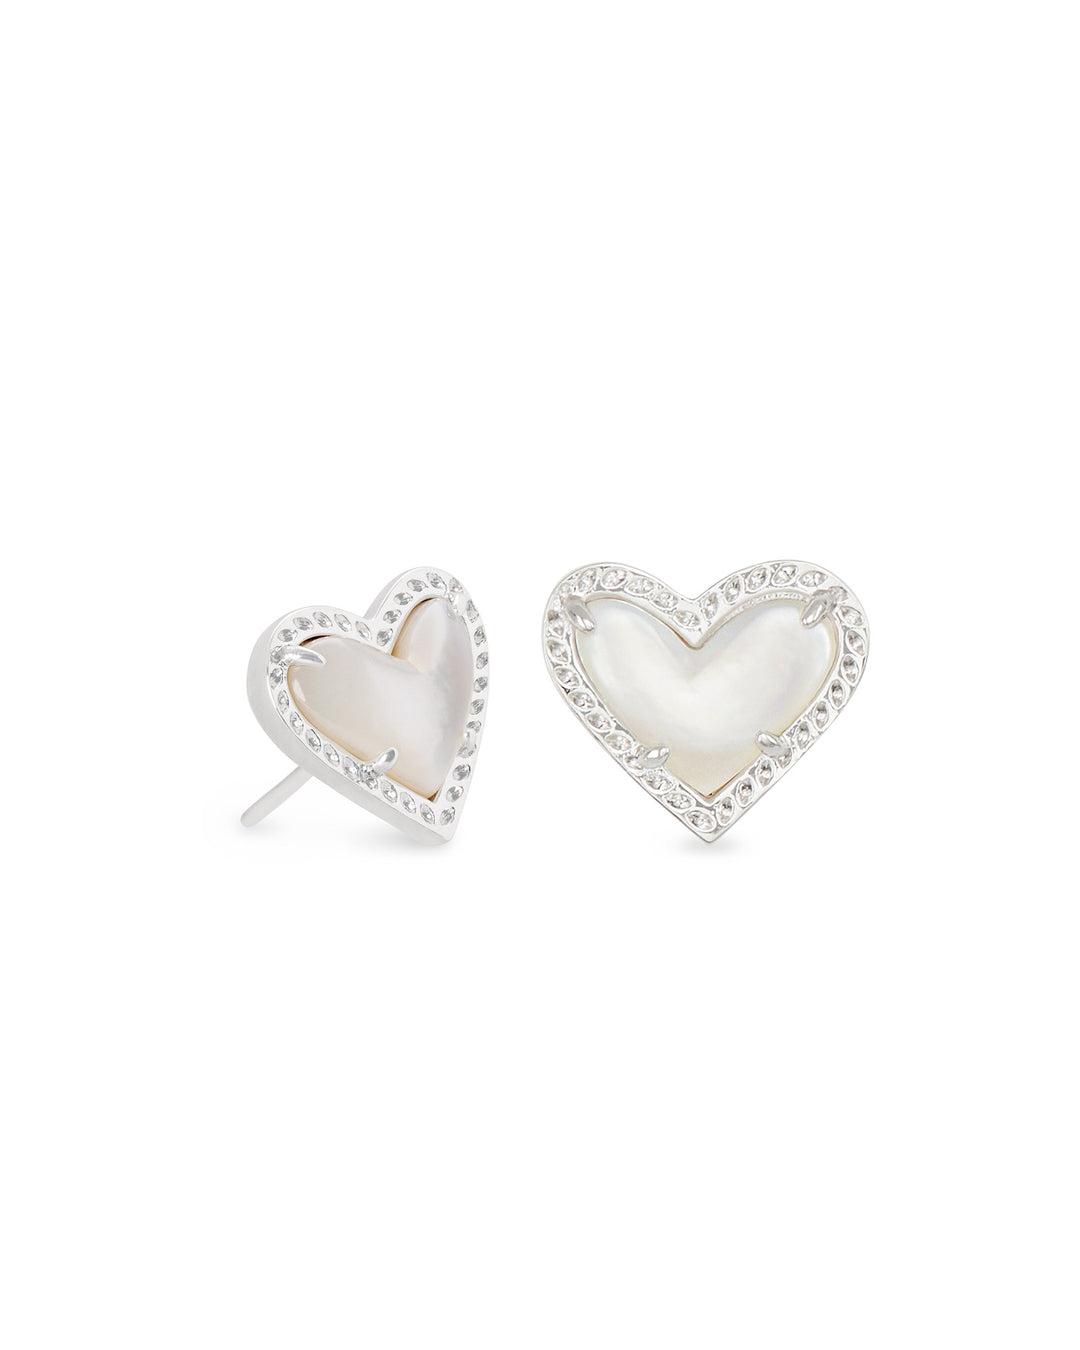 ARI HEART STUD EARRING - MOTHER OF PEARL AND SILVER